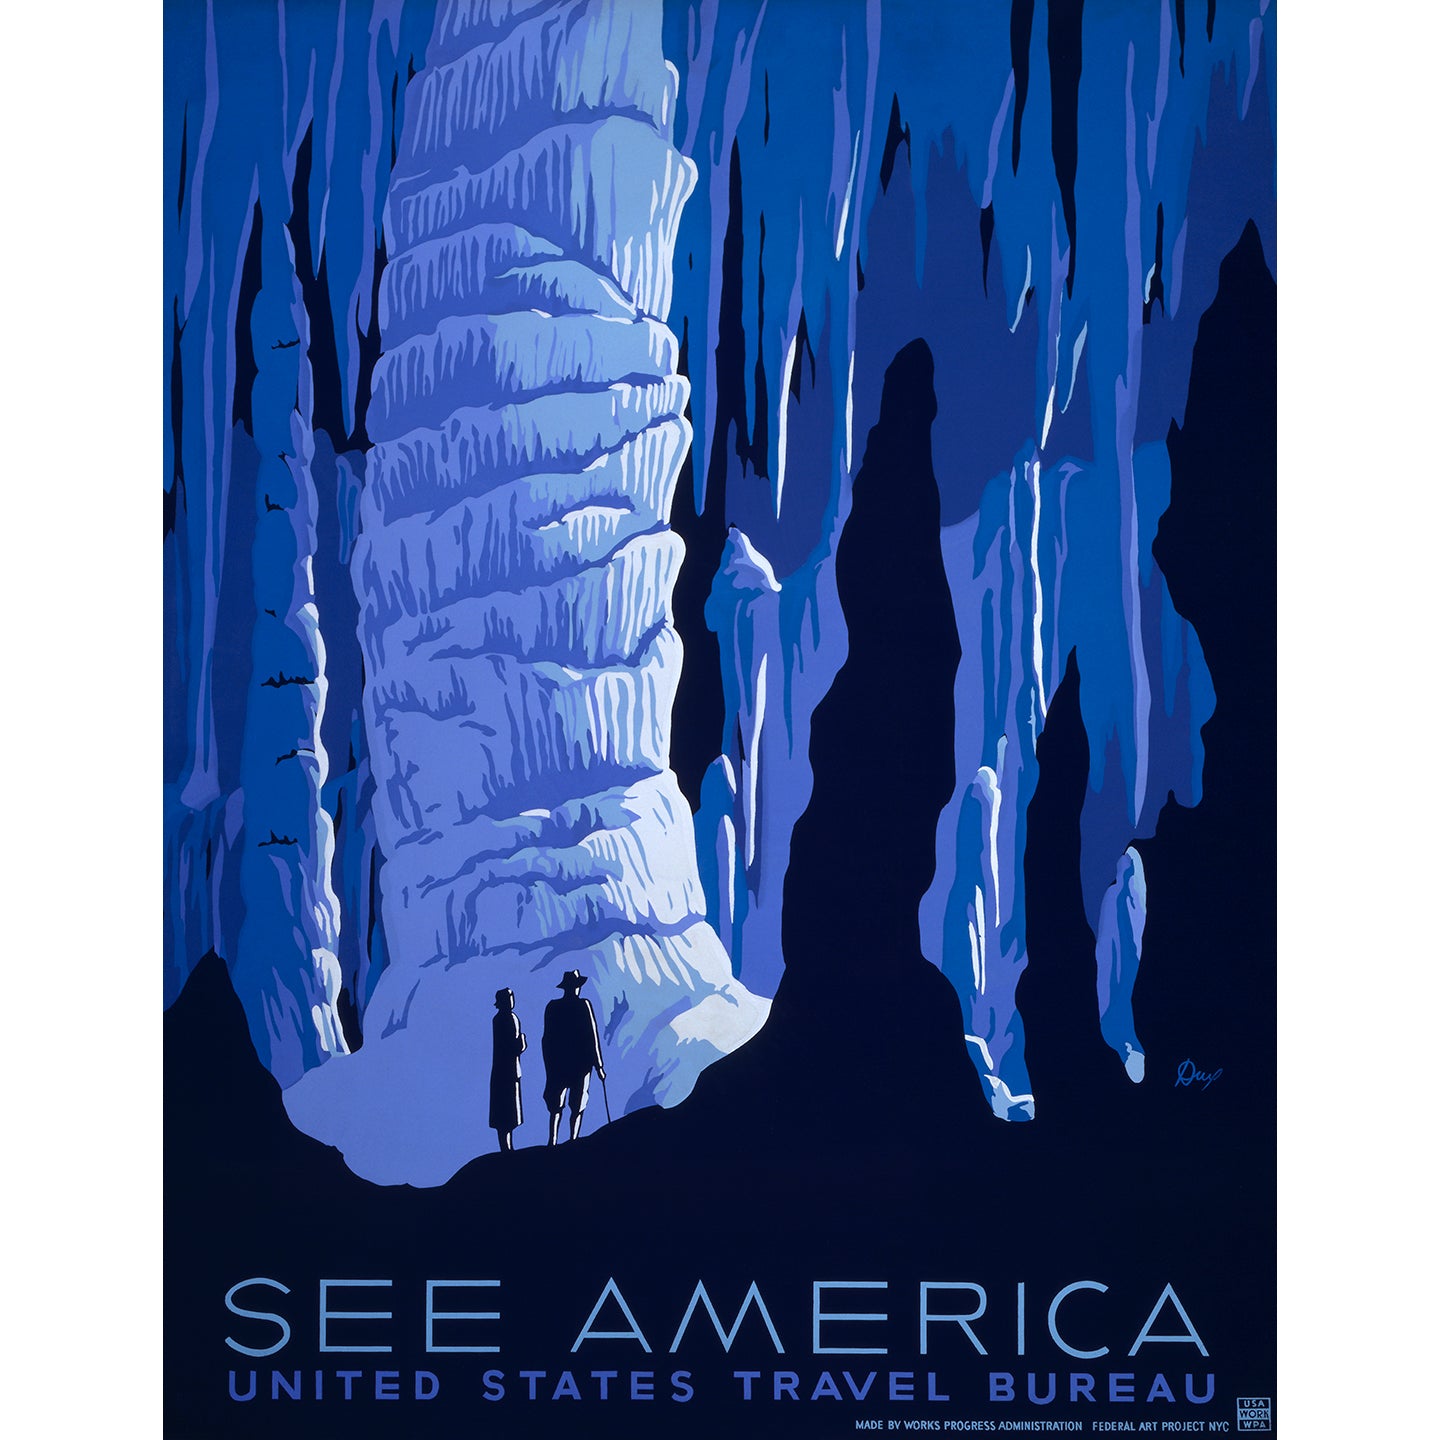 Vintage travel poster featuring the slogan See America